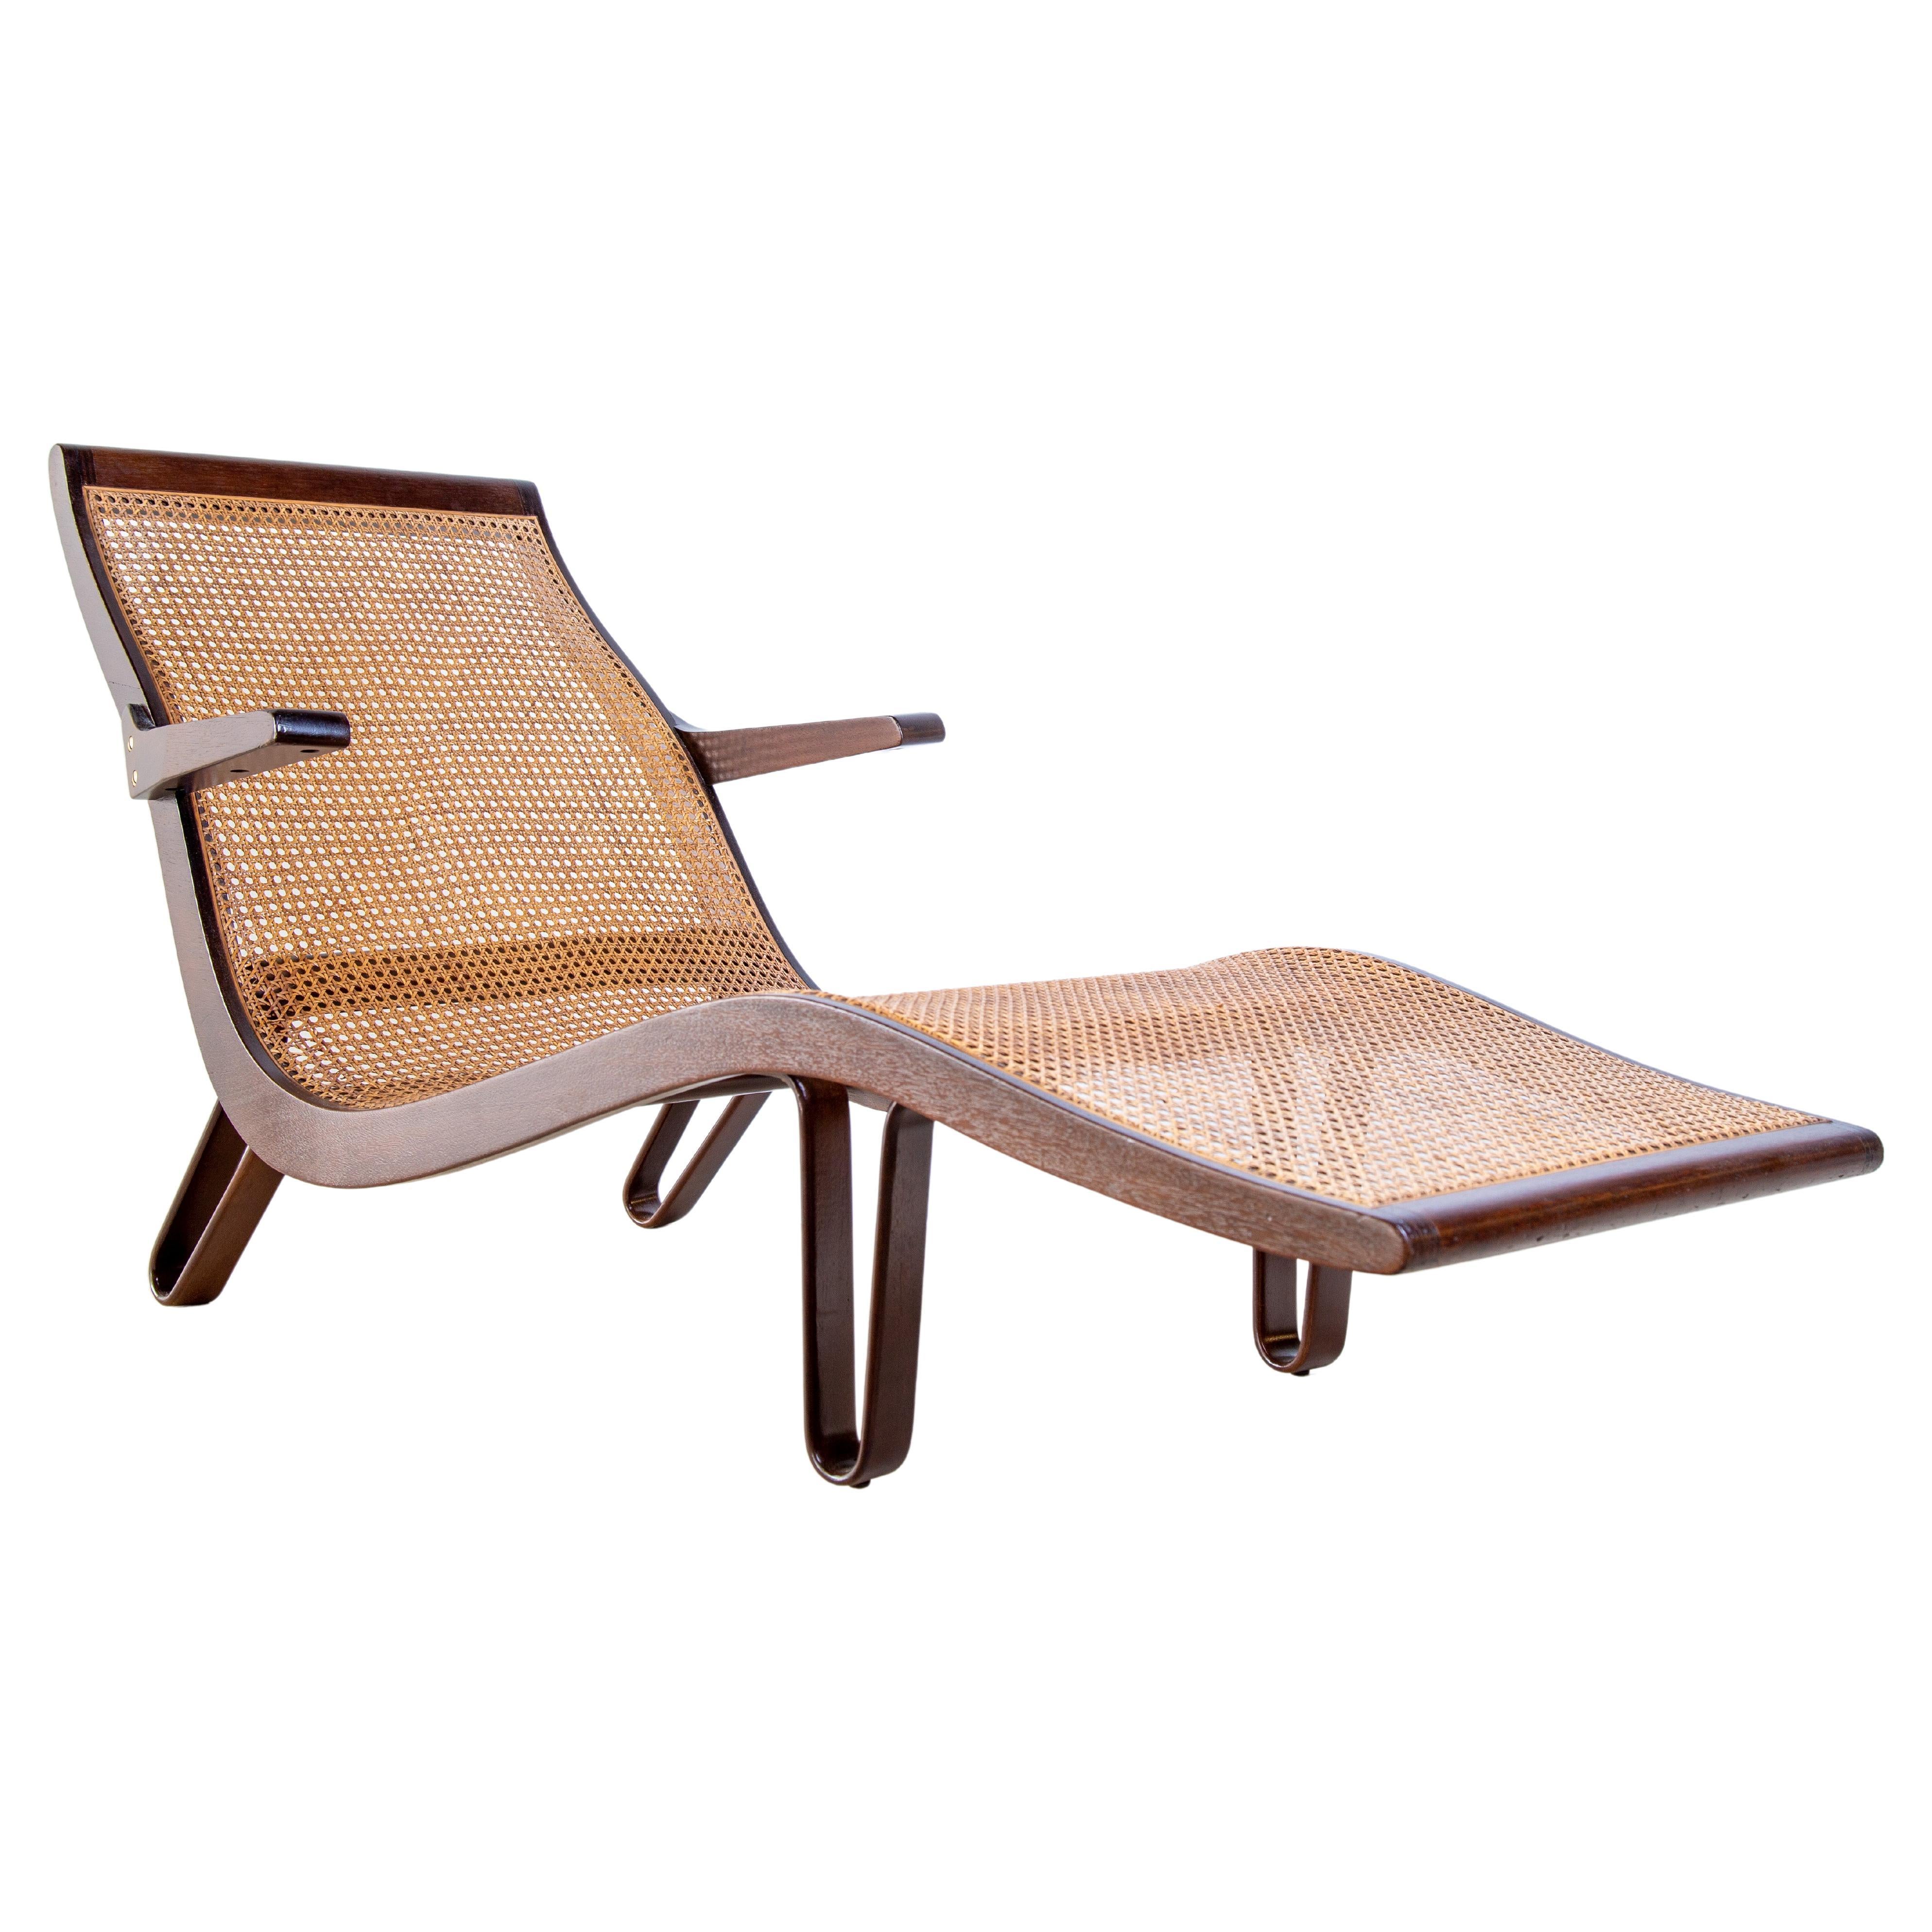 Ultra rare chaise lounge by Edward Wormley for Dunbar in cane and mahogany on bent wood hairpin legs.  As much art, as it is form, this chaise will be the centerpiece of your design.  One of only 8 examples to resurface this is a collectors